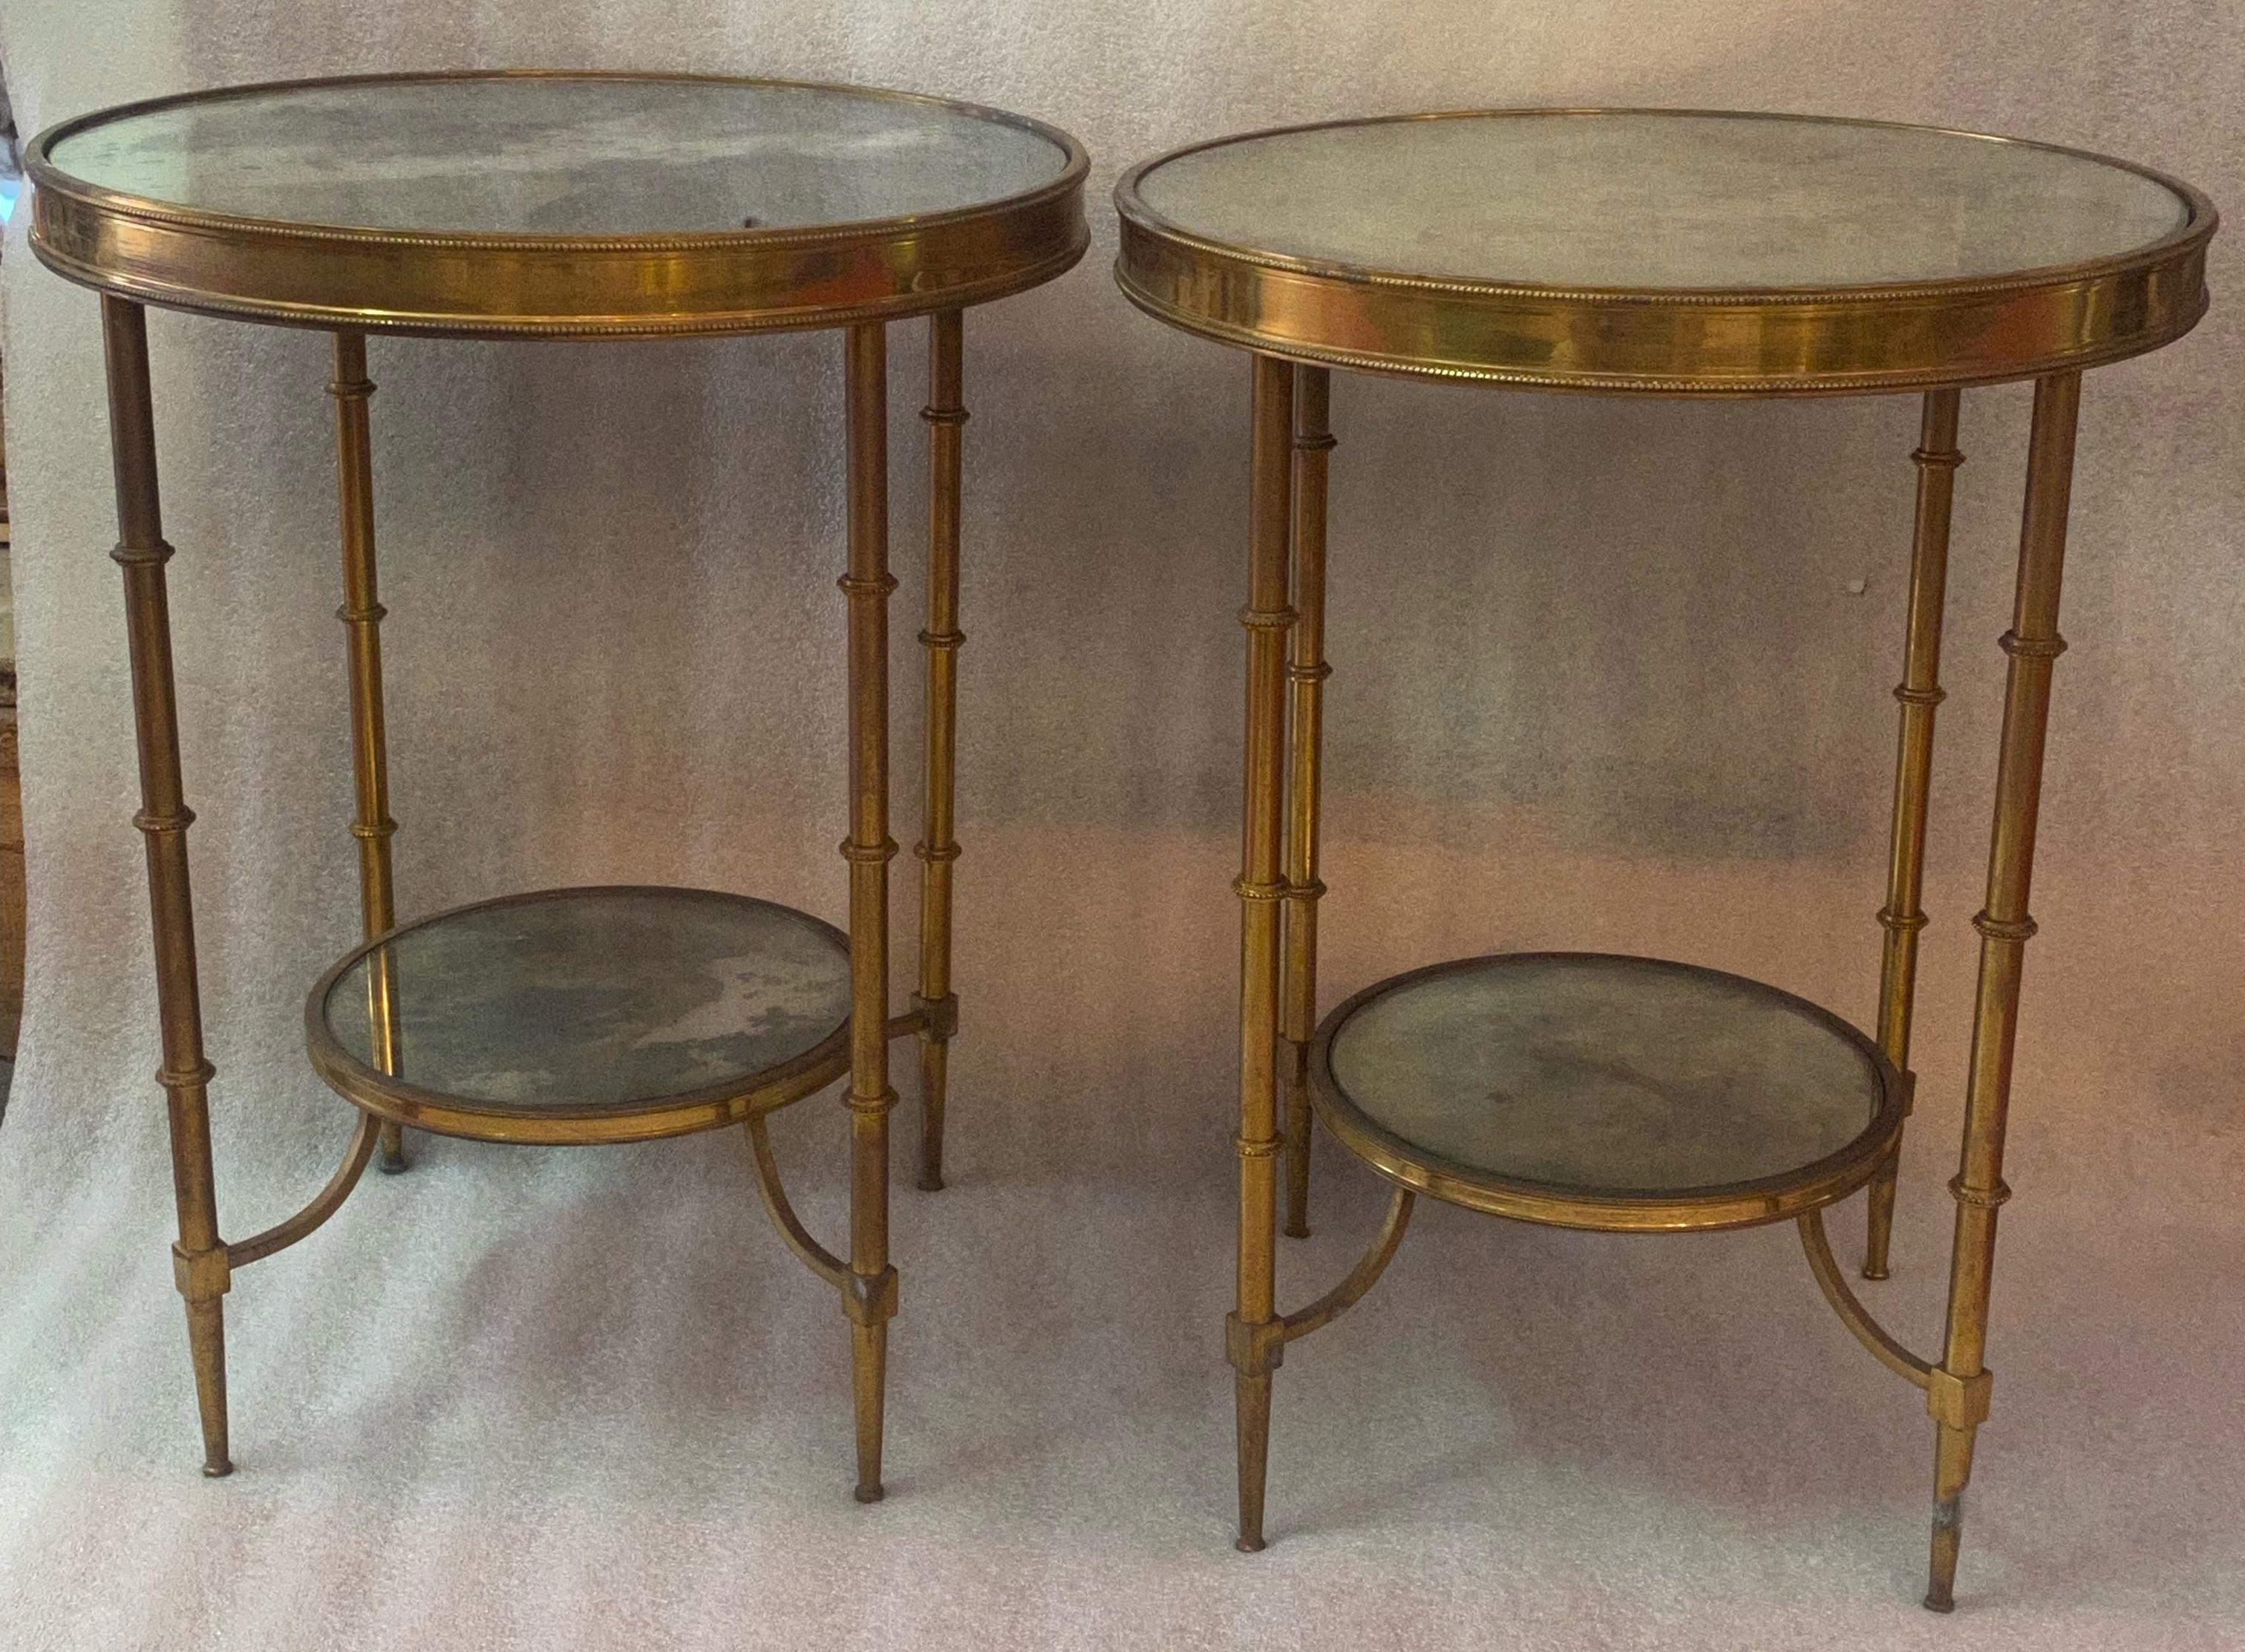 Pair of bronze pedestal tables, olded oxidized mirror tops, bamboo decor uprights, spacer with lower round top,
Measures: Diameter: 38.5 cm
Height:49.5cm
Bottom tray diameter: 23 cm
Beaded belt
Everything is screwed.